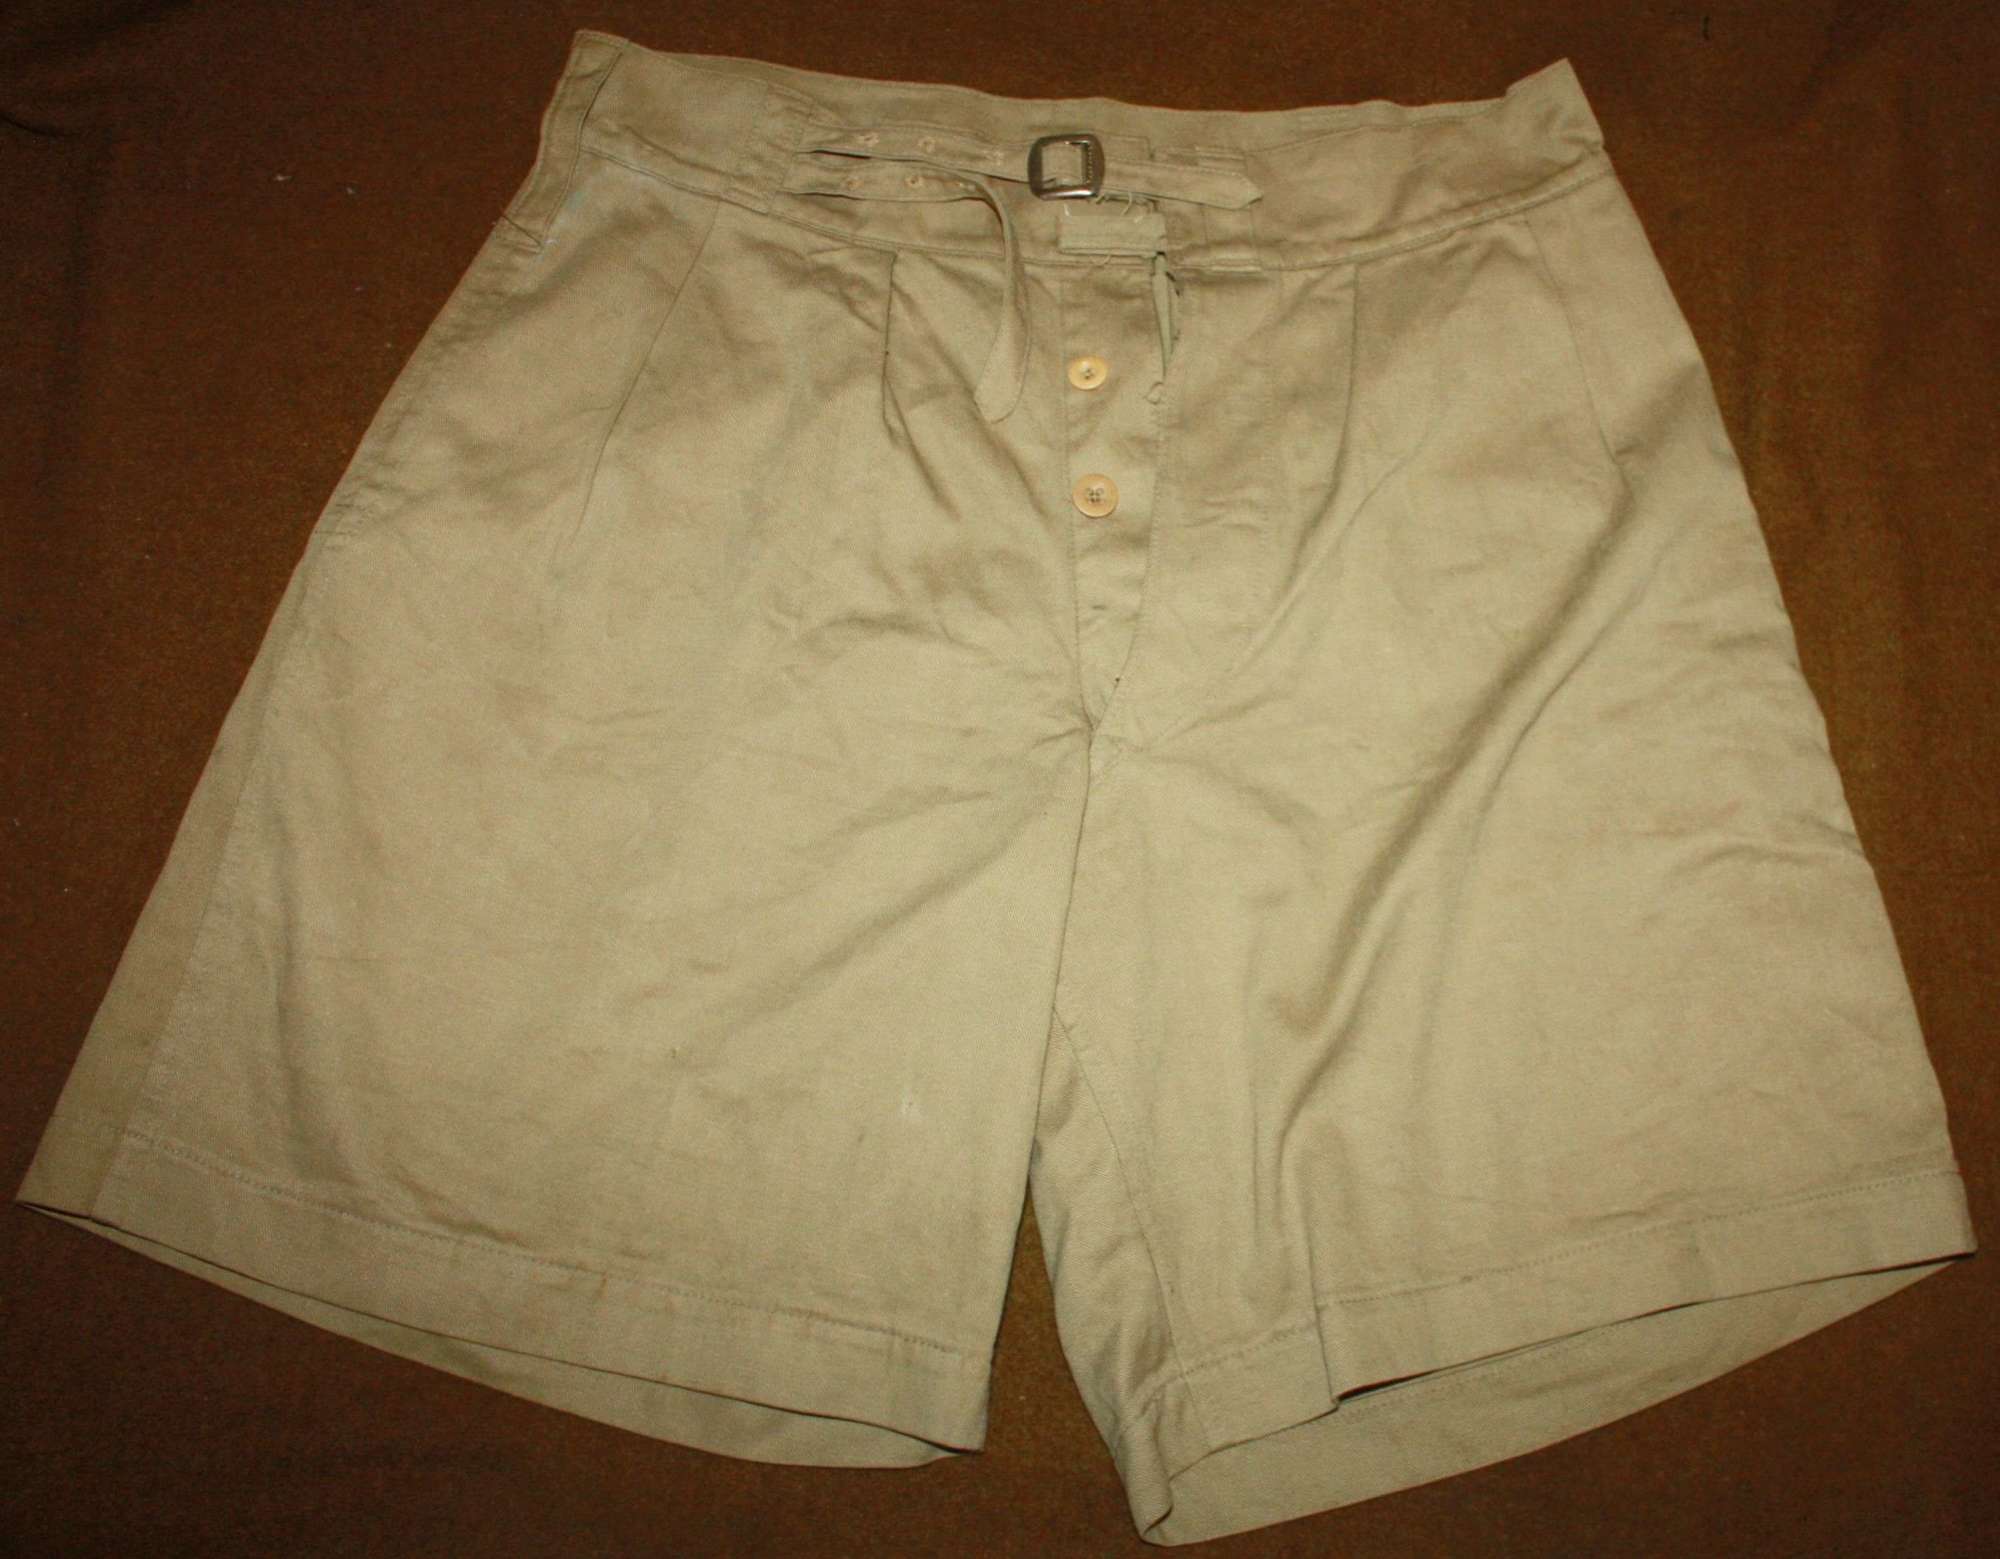 A PAIR OF 1941 PATTERN SHORTS 1945 DATED